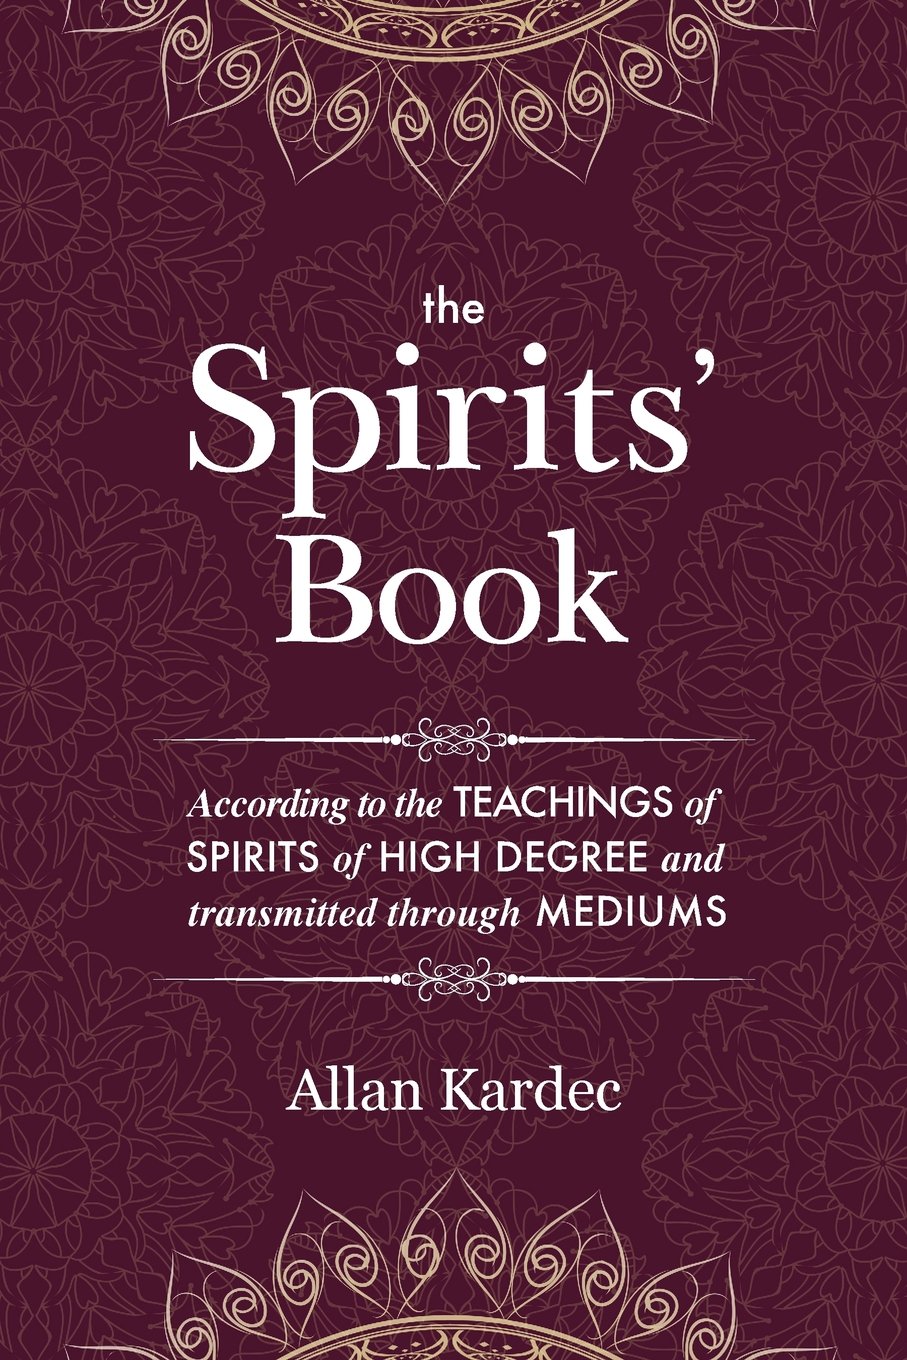 The Spirits’ Book: containing the principles of spiritist doctrine on the immortality of the soul